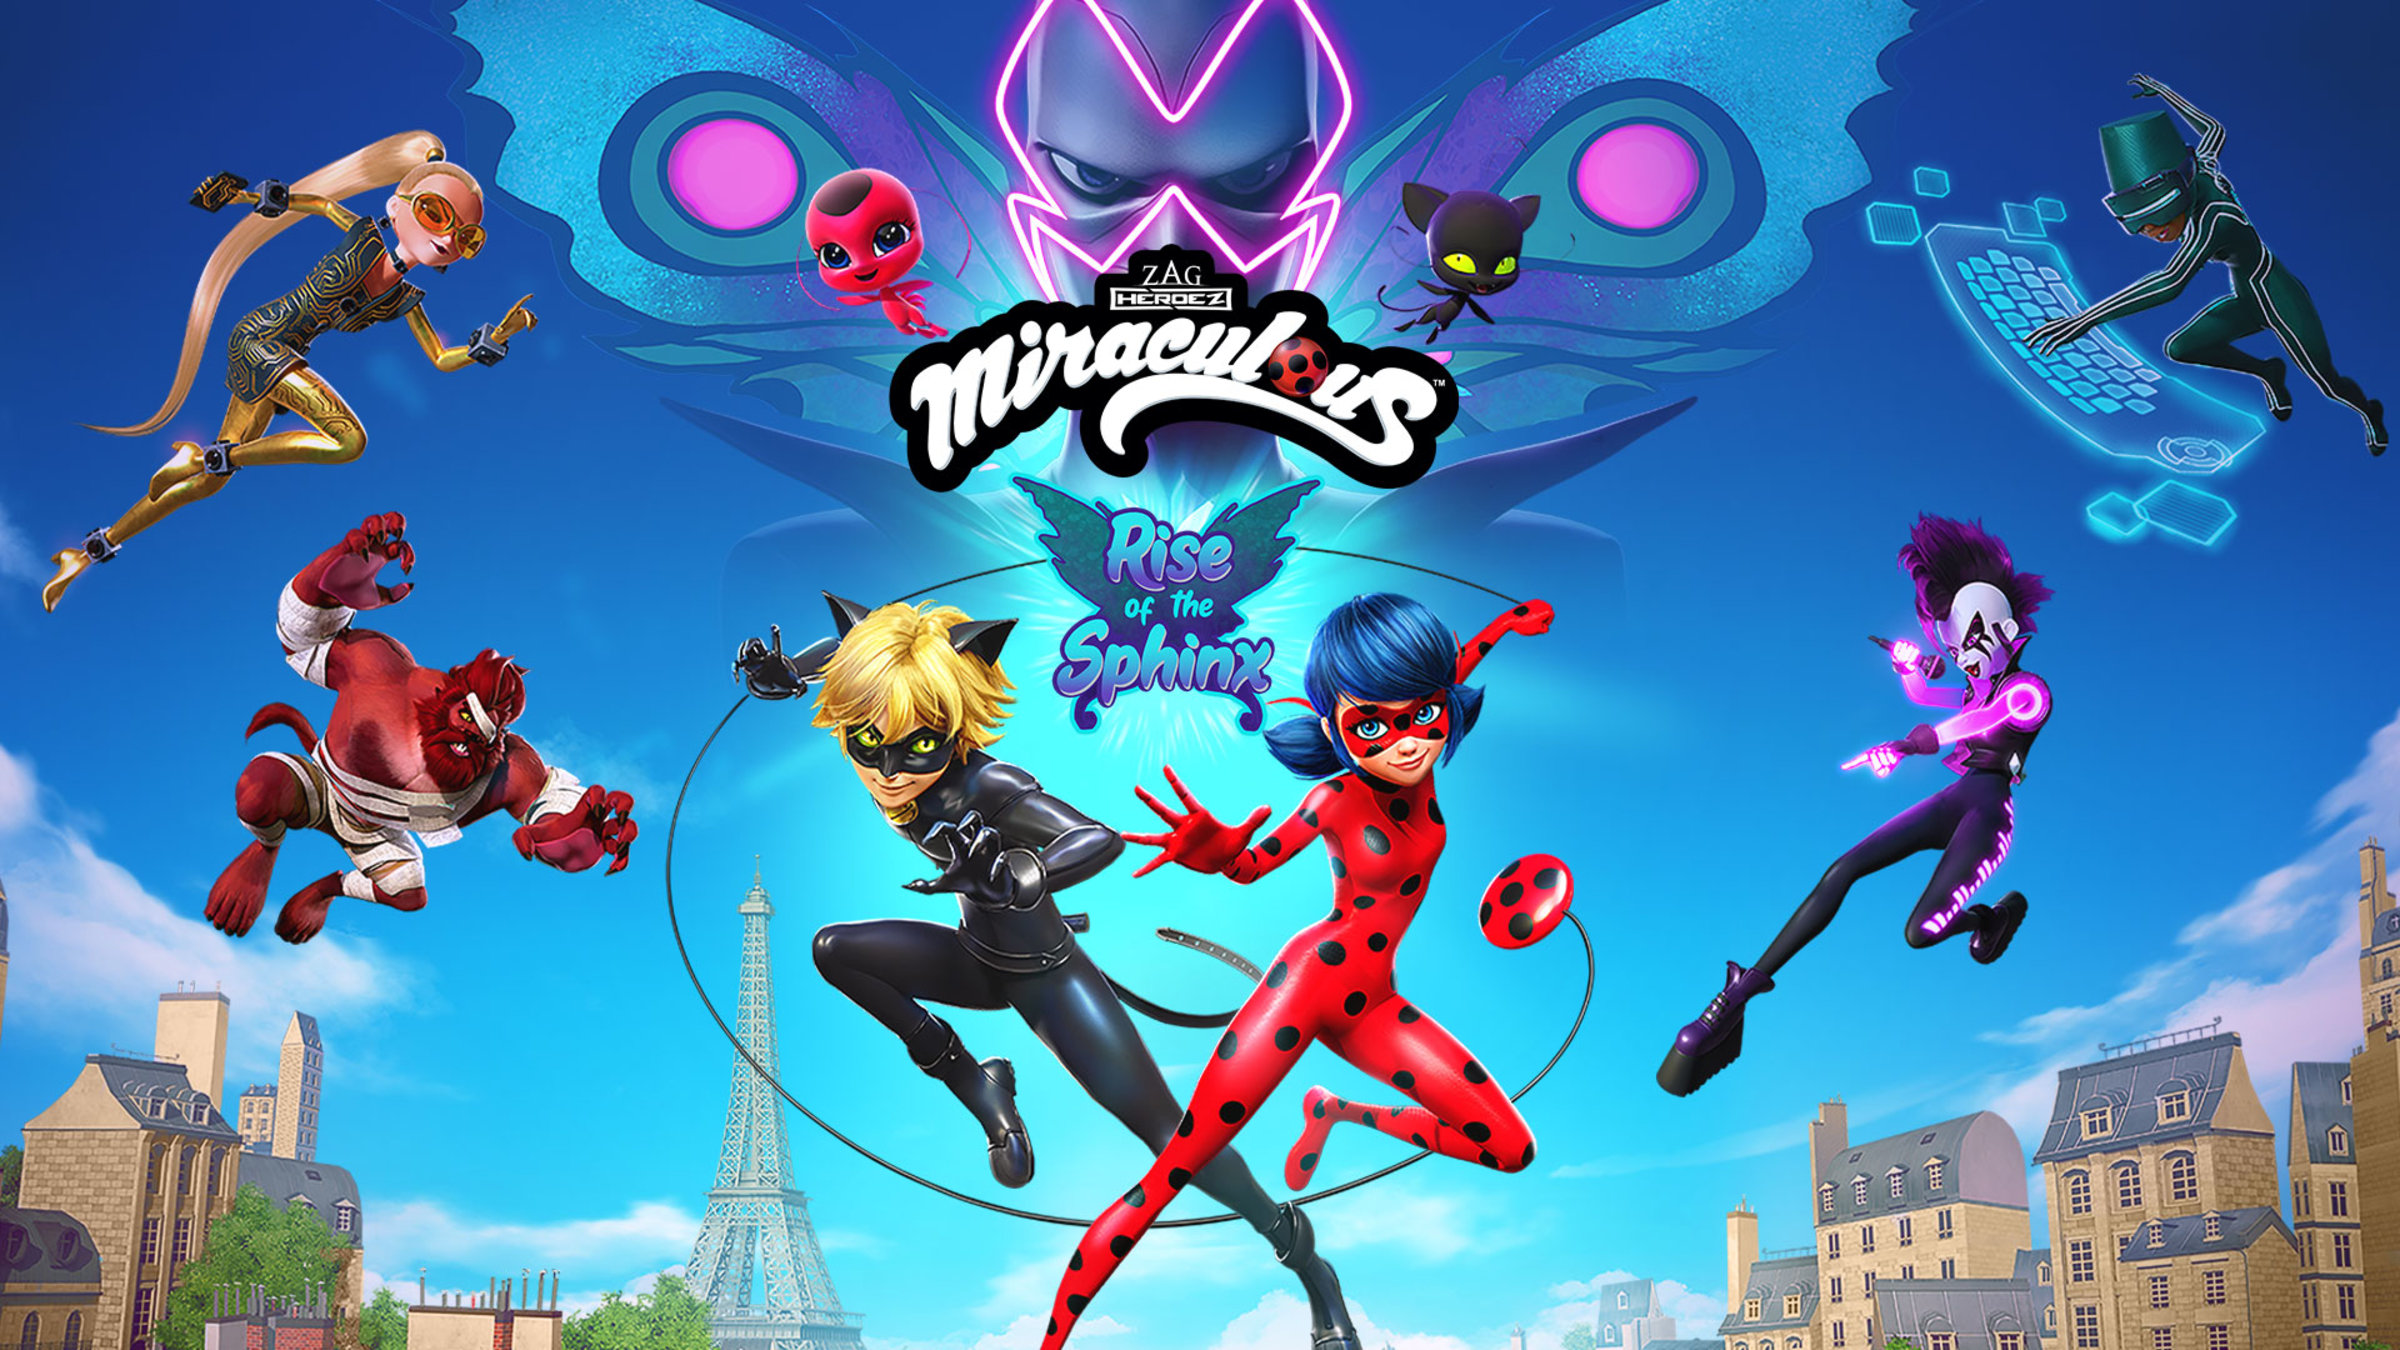 Miraculous [Ladybug and Cat Noir] — 3 Eyed Ghost